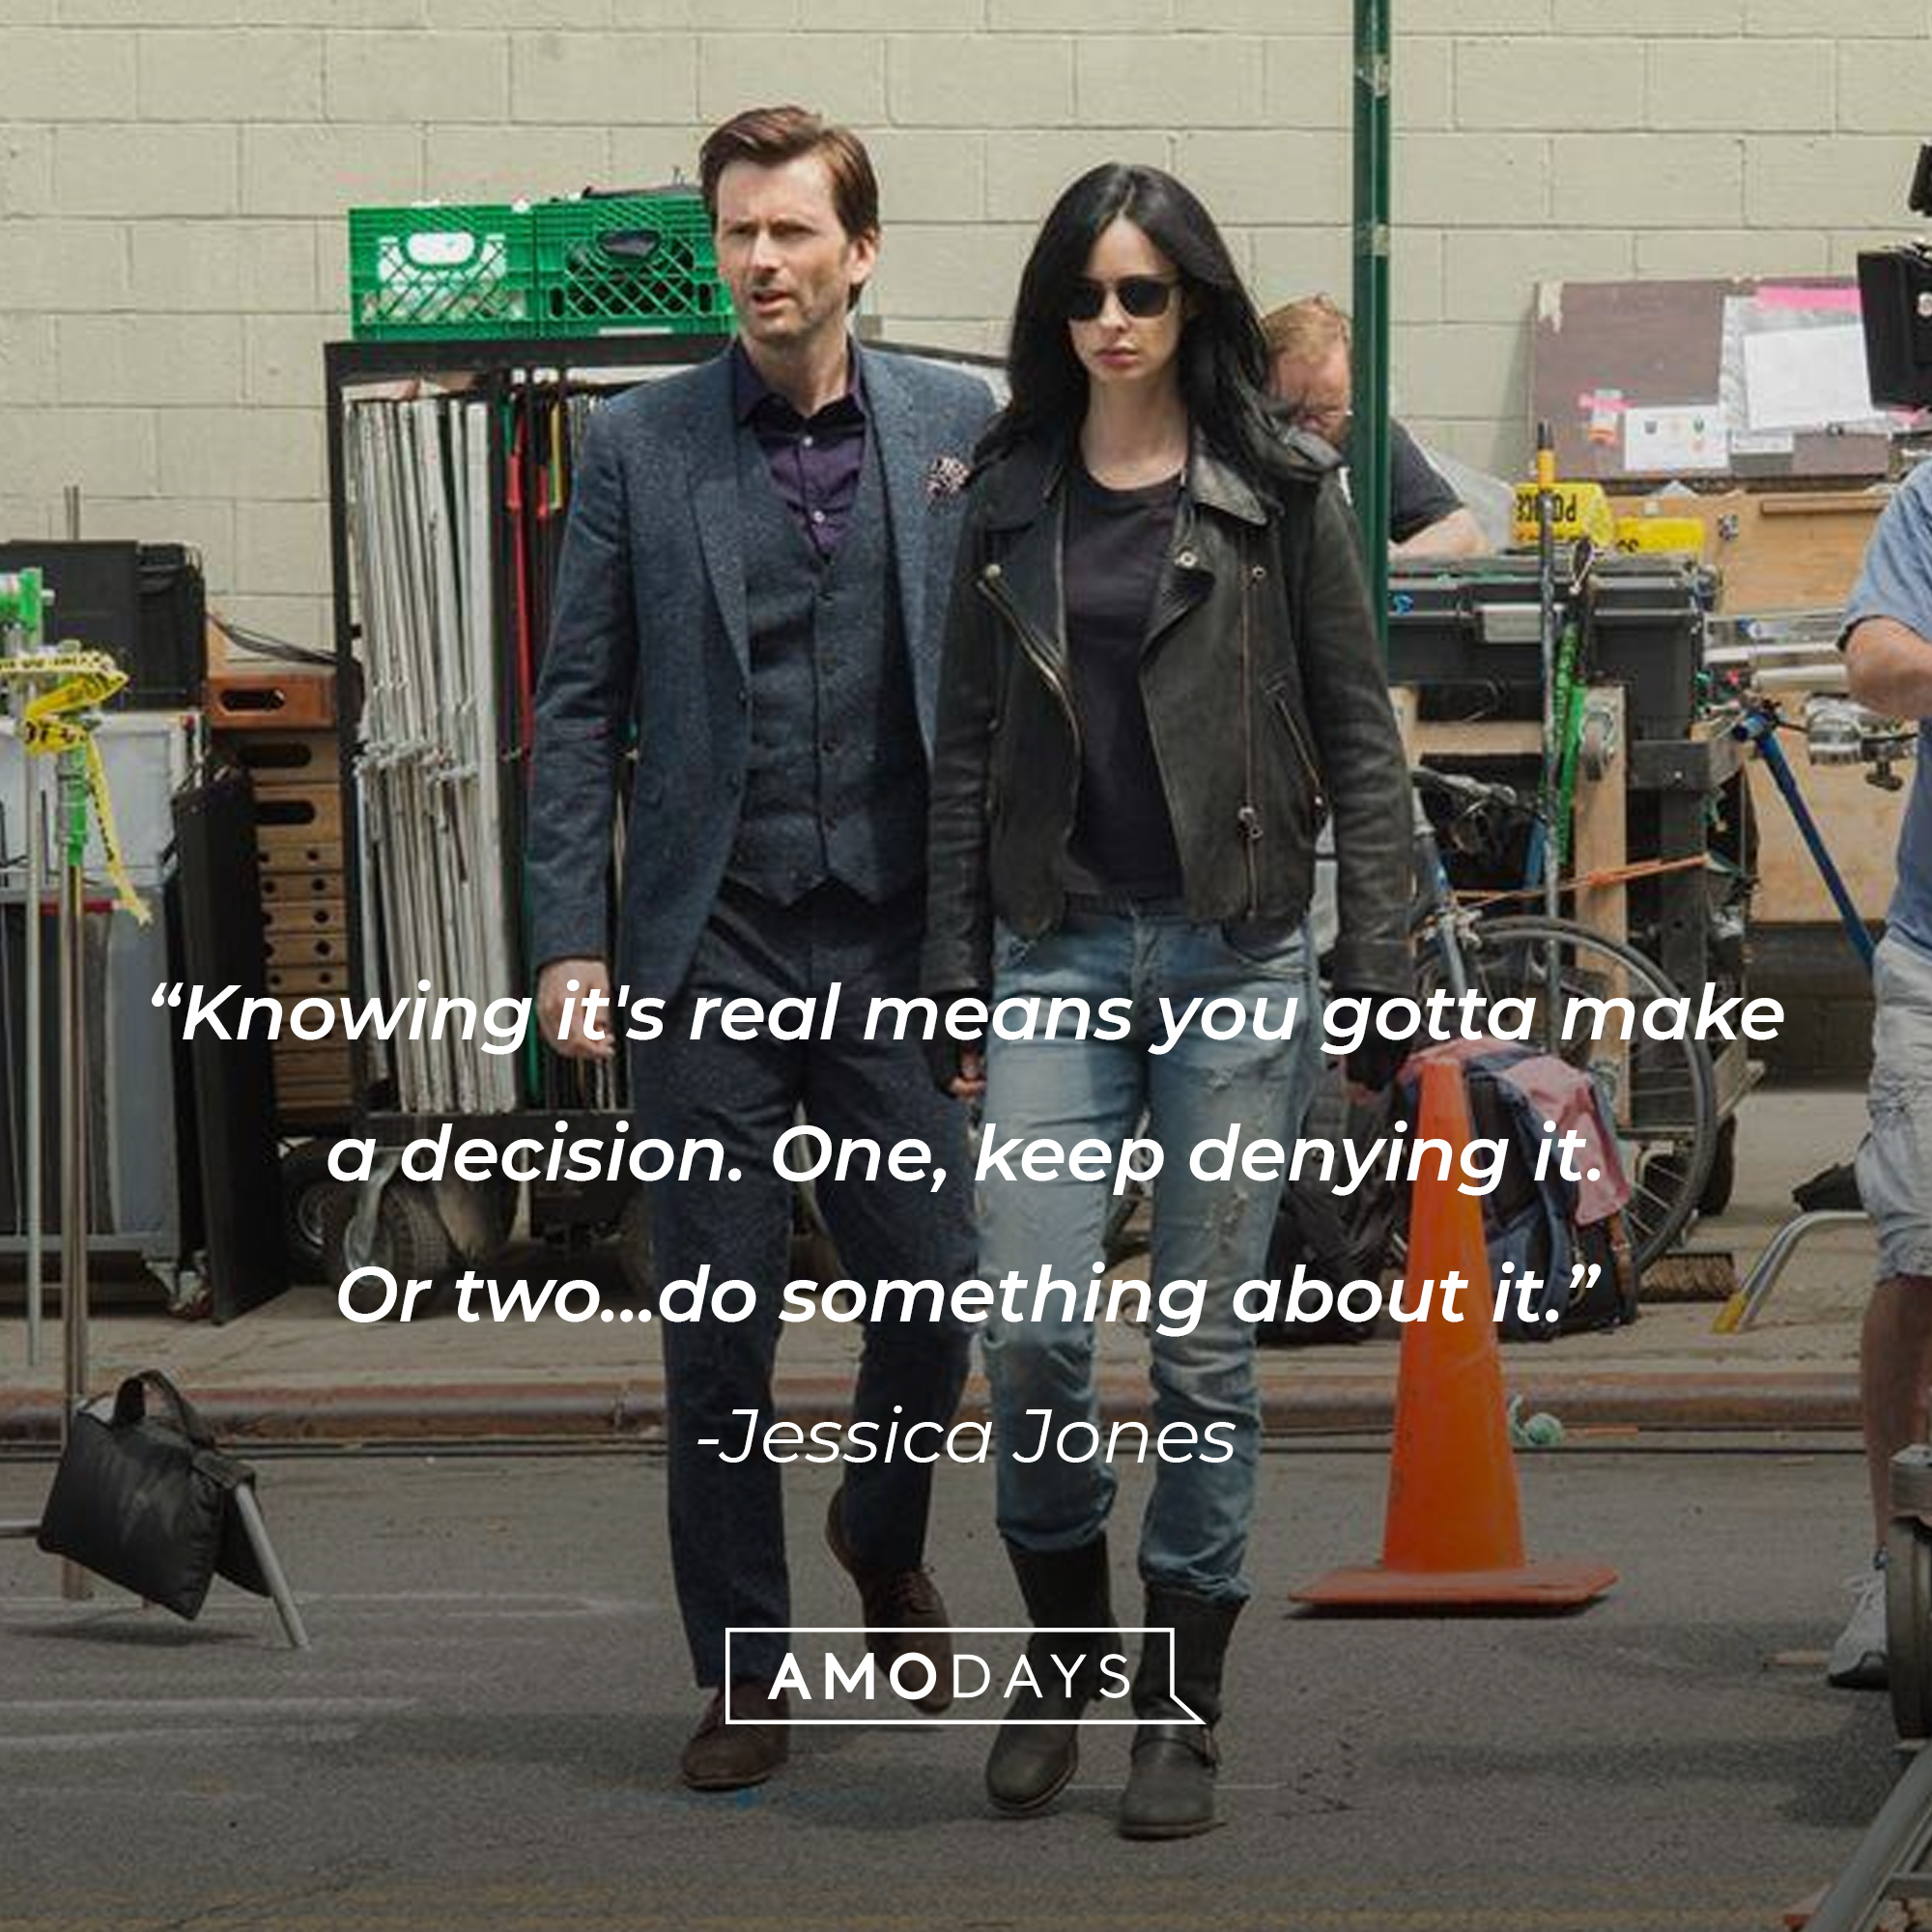 An image of Jessica Jones and Kilgrave with her quote: "Knowing it's real means you gotta make a decision. One, keep denying it. Or two...do something about it."┃Source:facebook.com/JessicaJonesLat